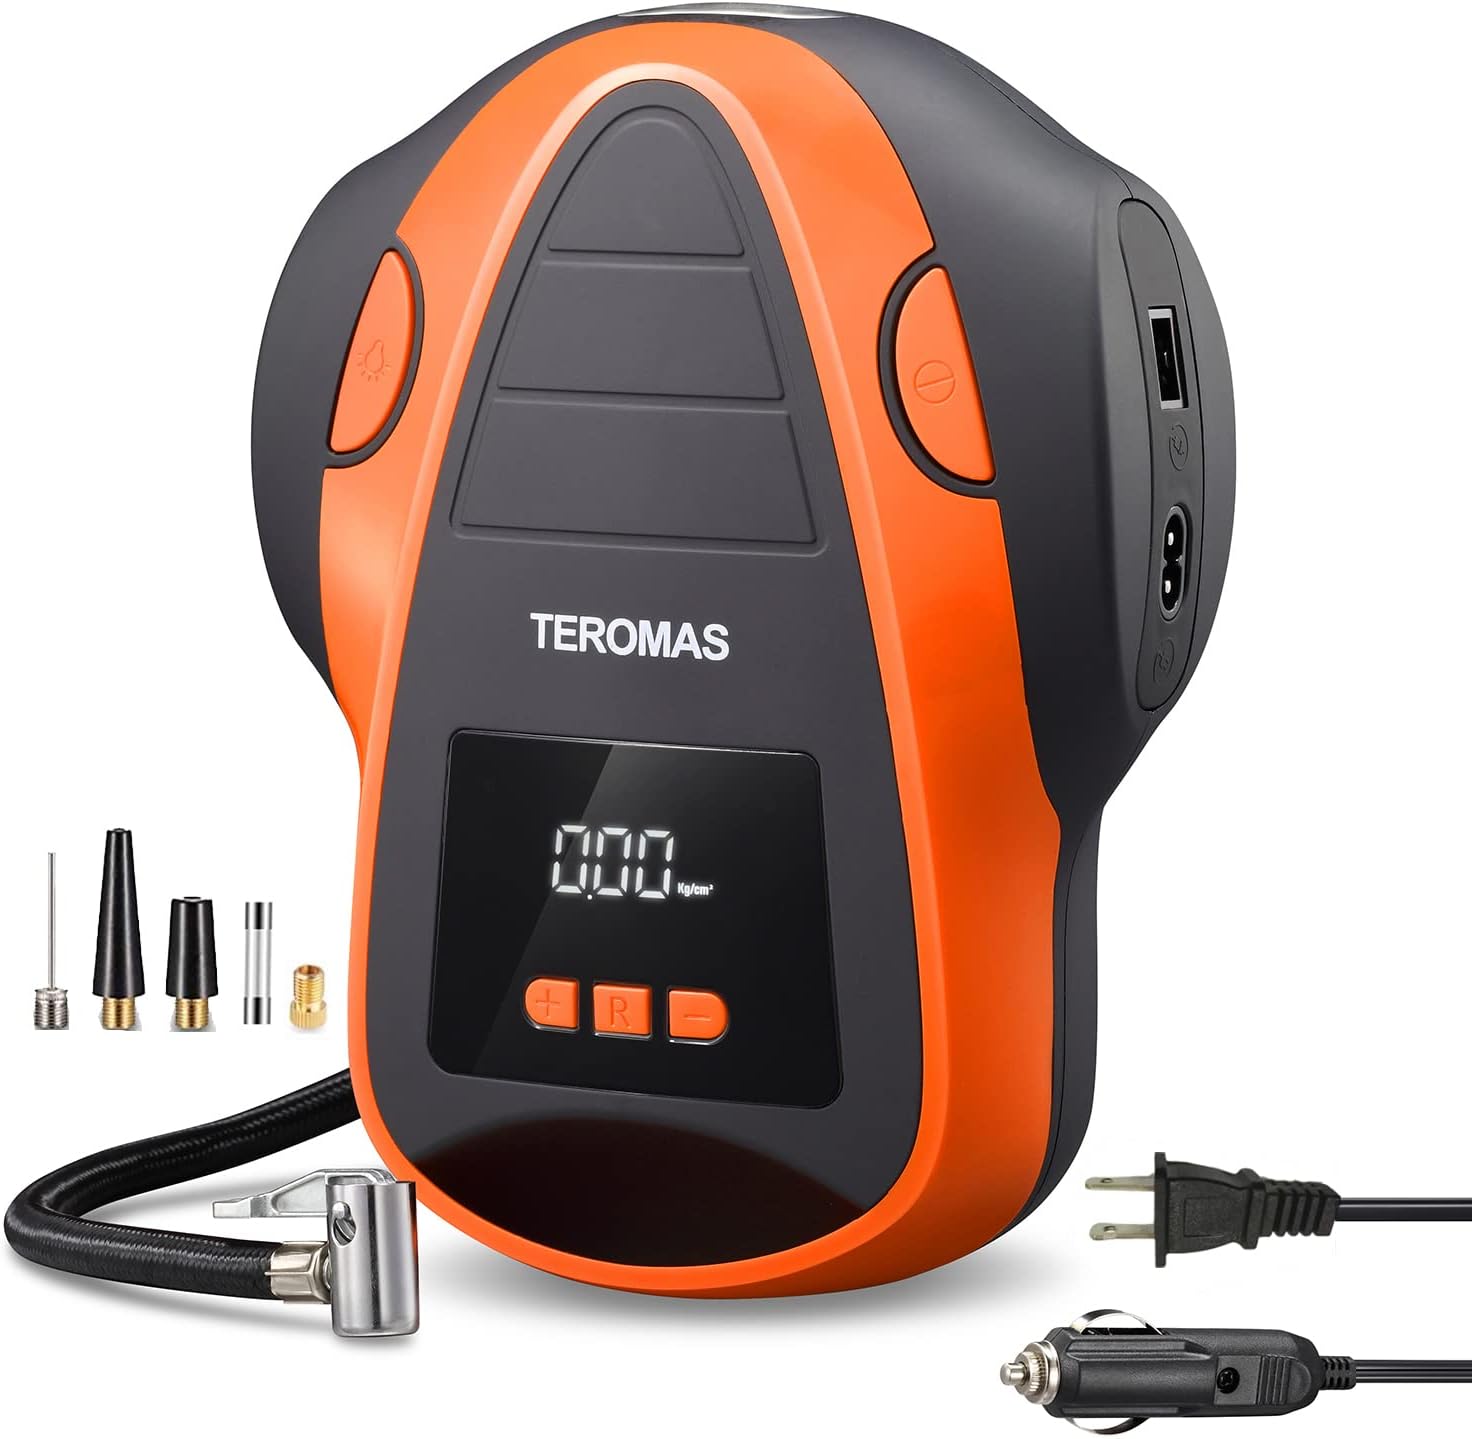 teromas tire inflator portable dcac air compressor for car 12v dc and other inflatables at home 110v ac digital electric 3